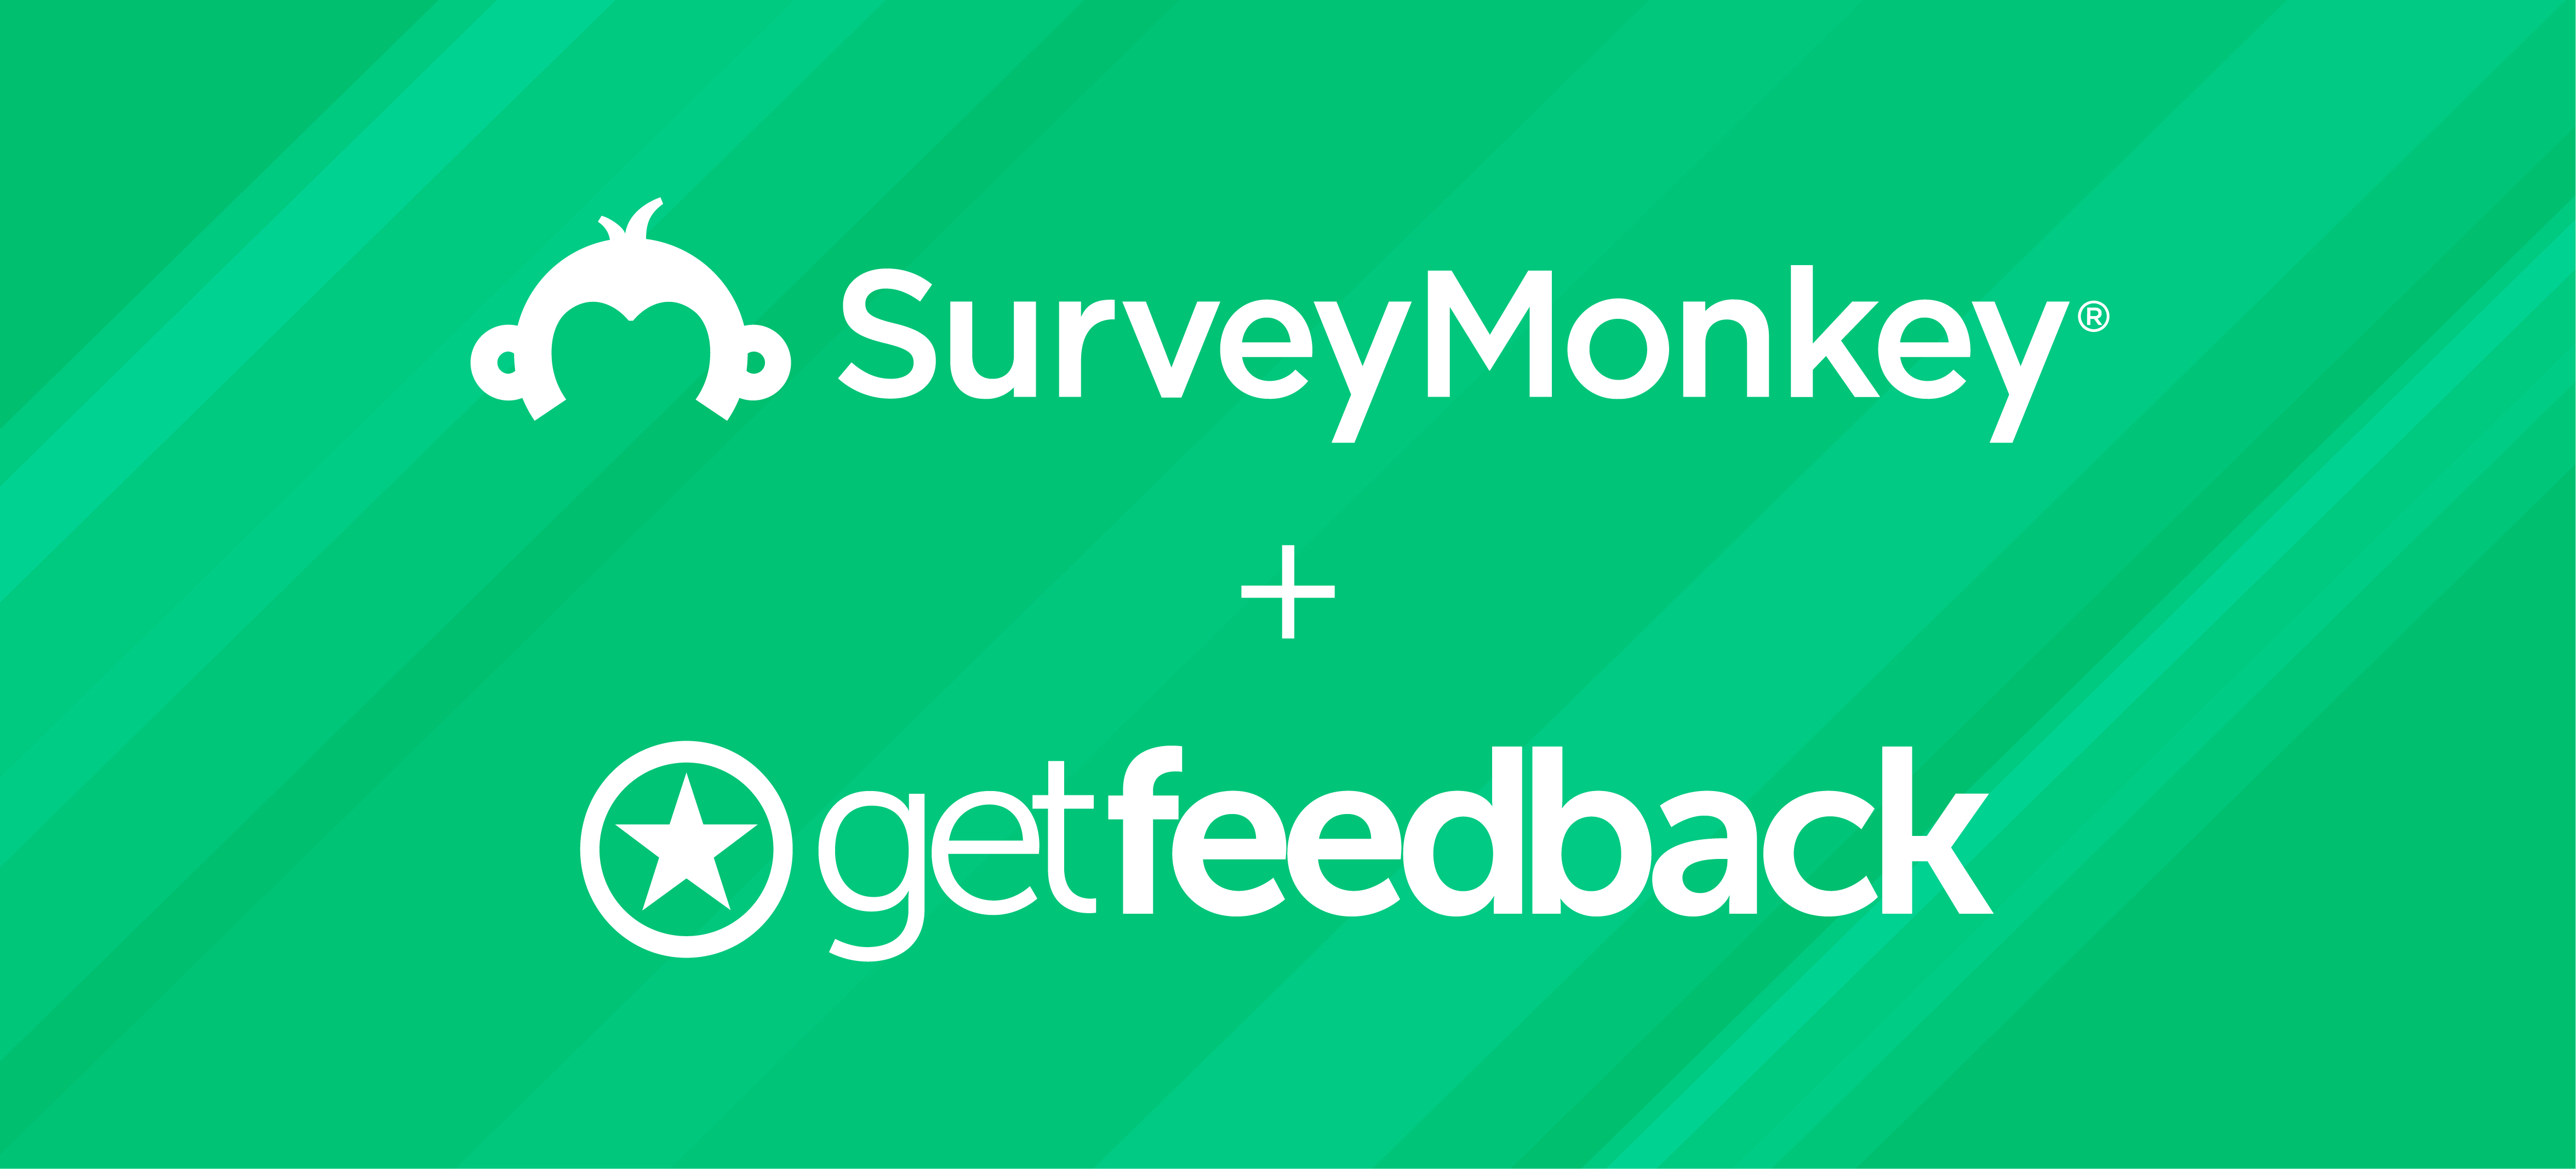 SurveyMonkey has entered into an agreement to acquire GetFeedback 